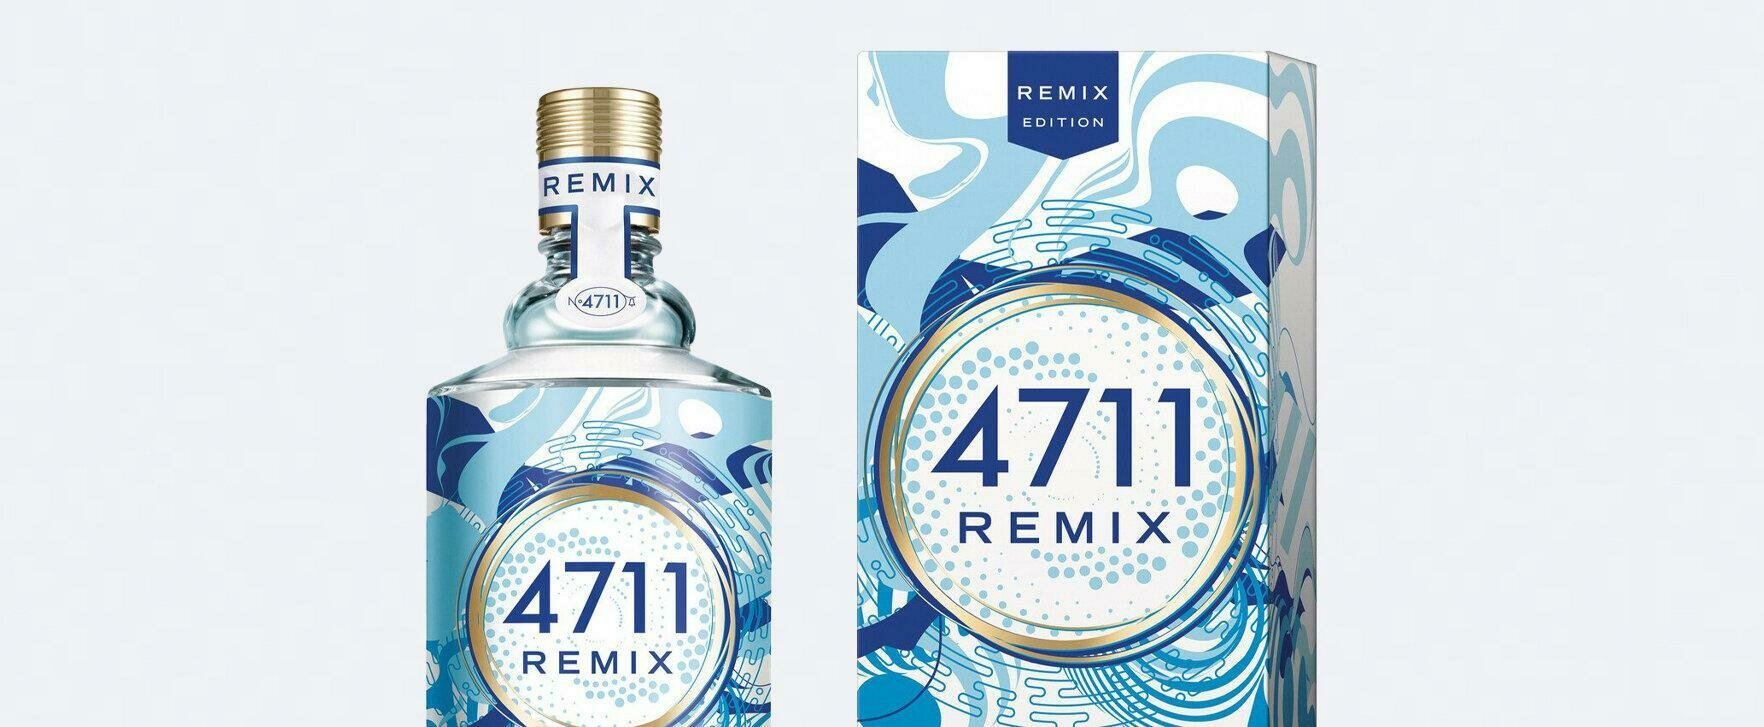 Sparkling and Refreshing: The New Unisex Fragrance “Remix Cologne Edition 2023” by 4711